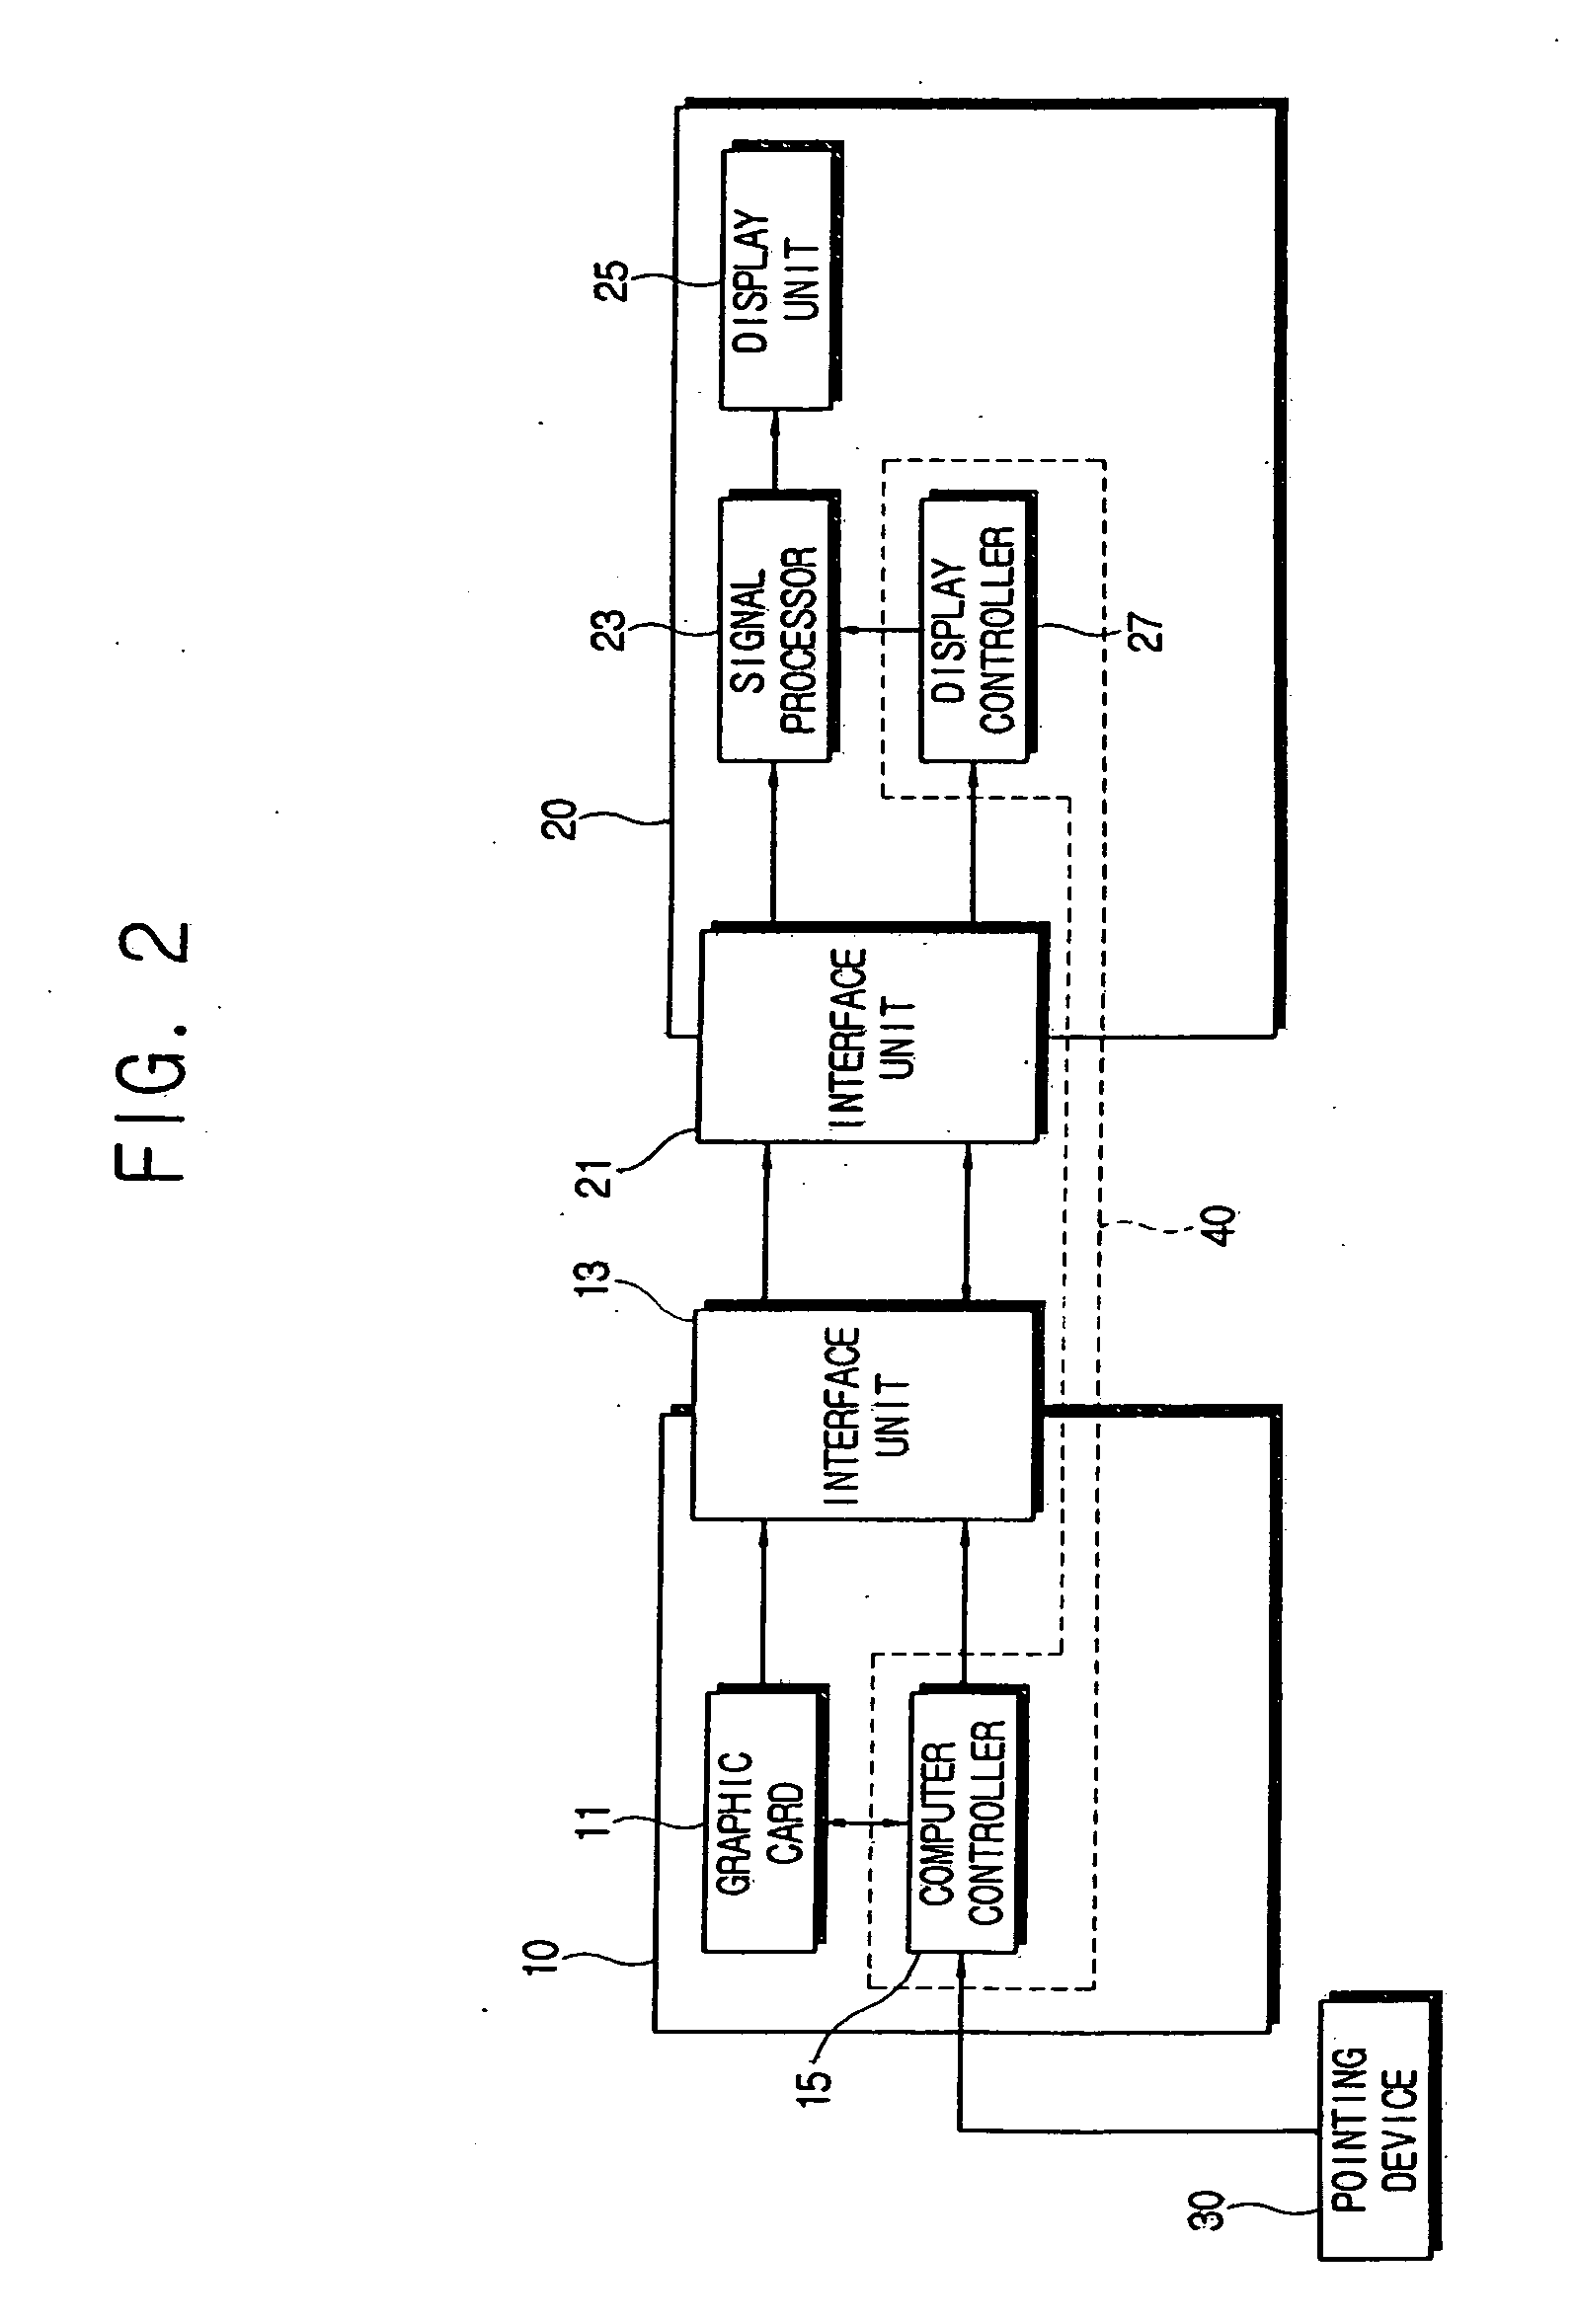 Display apparatus, display system, and control method thereof